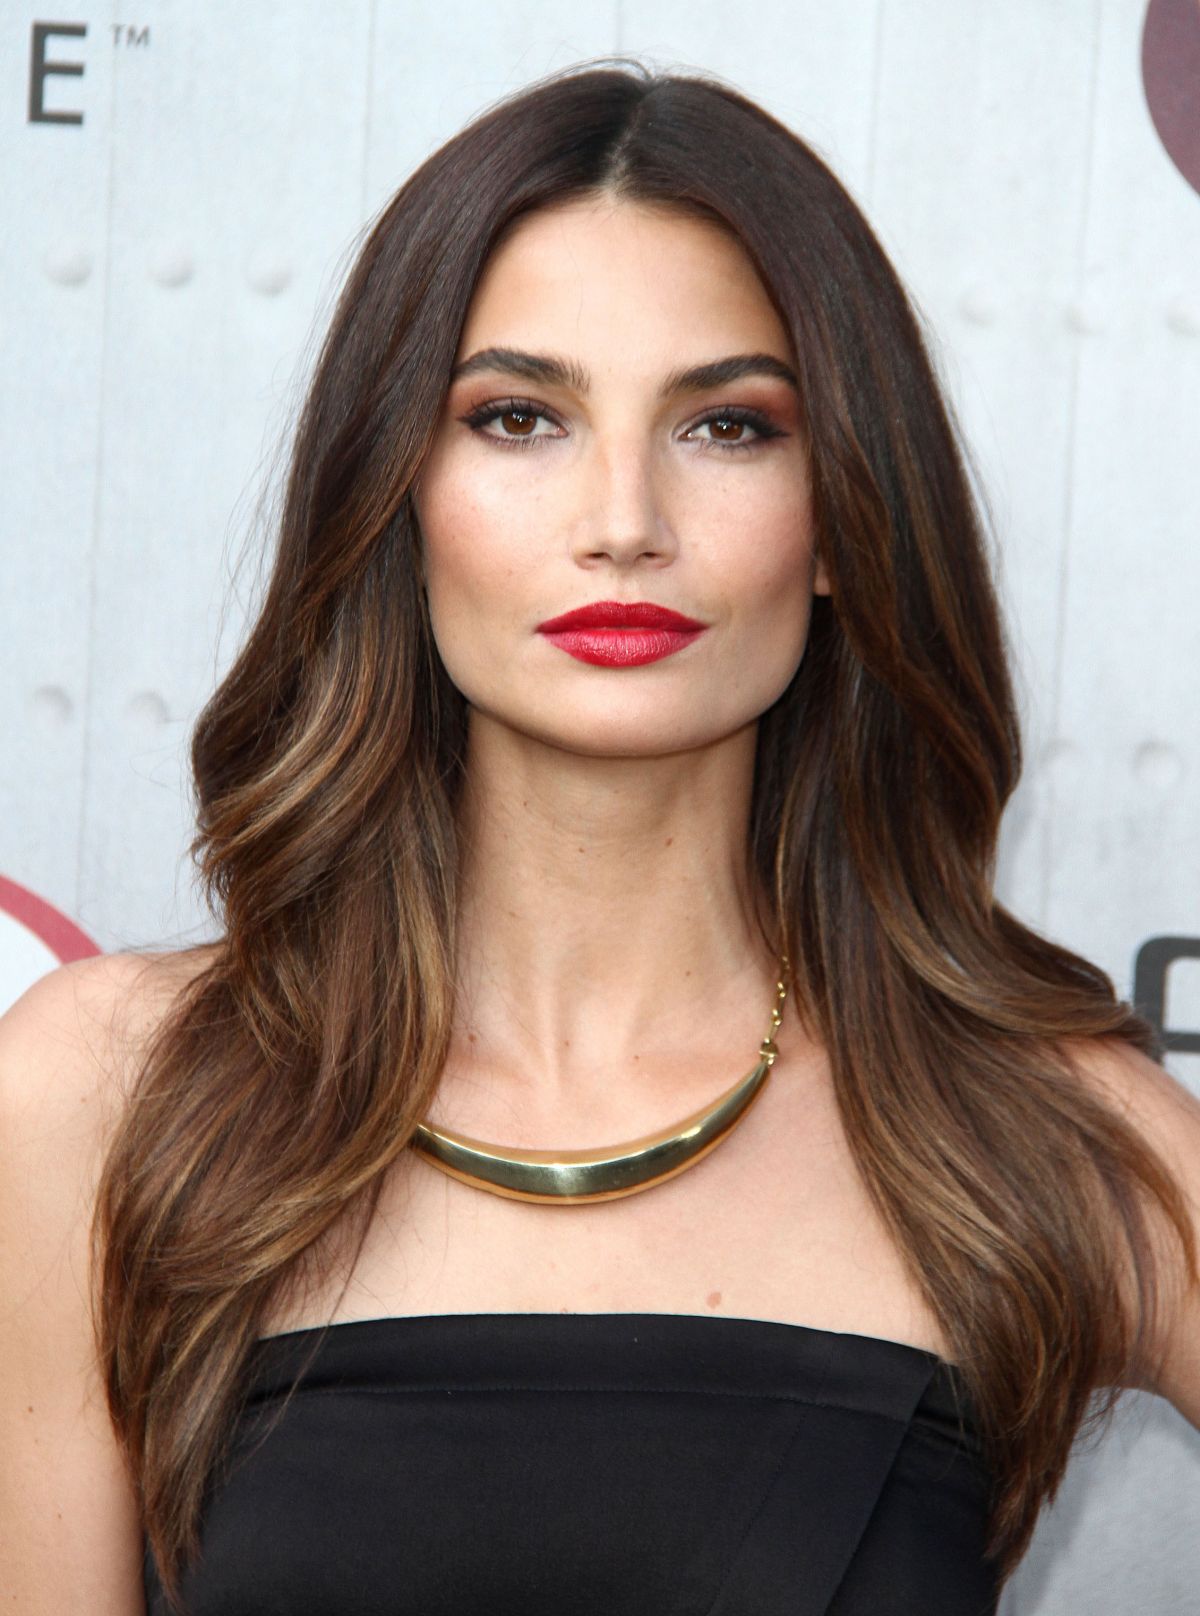 LILY ALDRIDGE at Spike TV’s Guys Choice Awards in Culver City – HawtCelebs